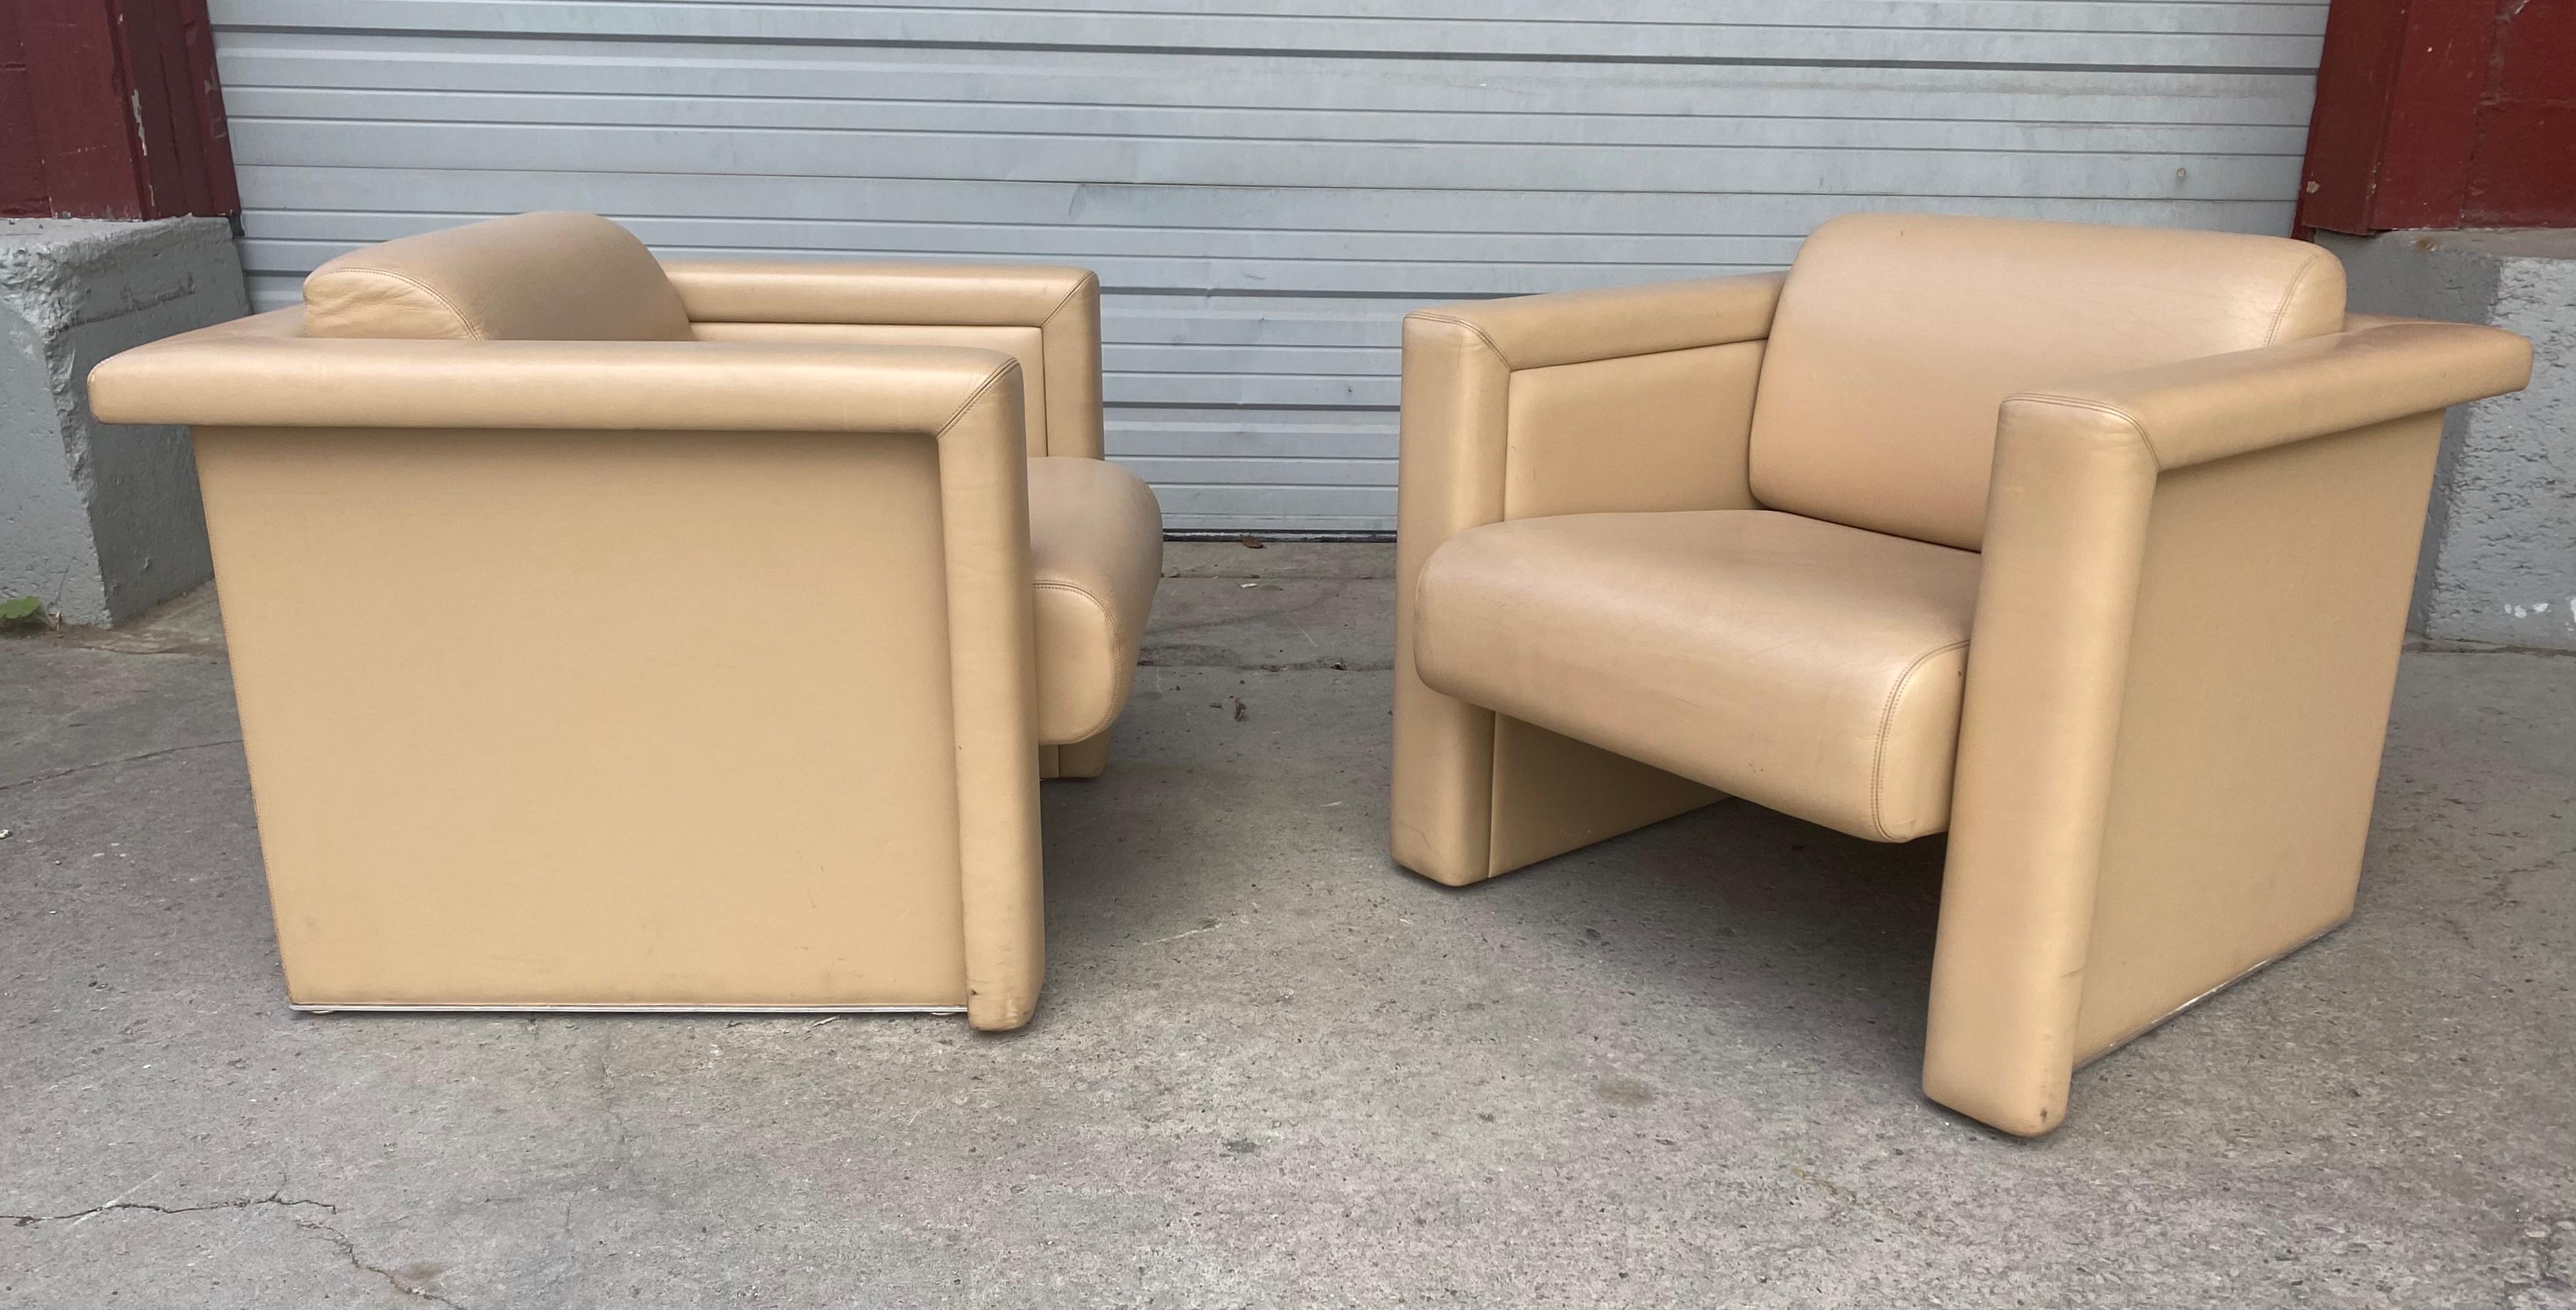 Stunning pair of leather chairs. Tobia Scarpa for Knoll, made in Italy.....Nice original condition, amazing quality / construction, stainless steel bases, retain original Knoll labels, hand delivery avail to New York City or anywhere en route from